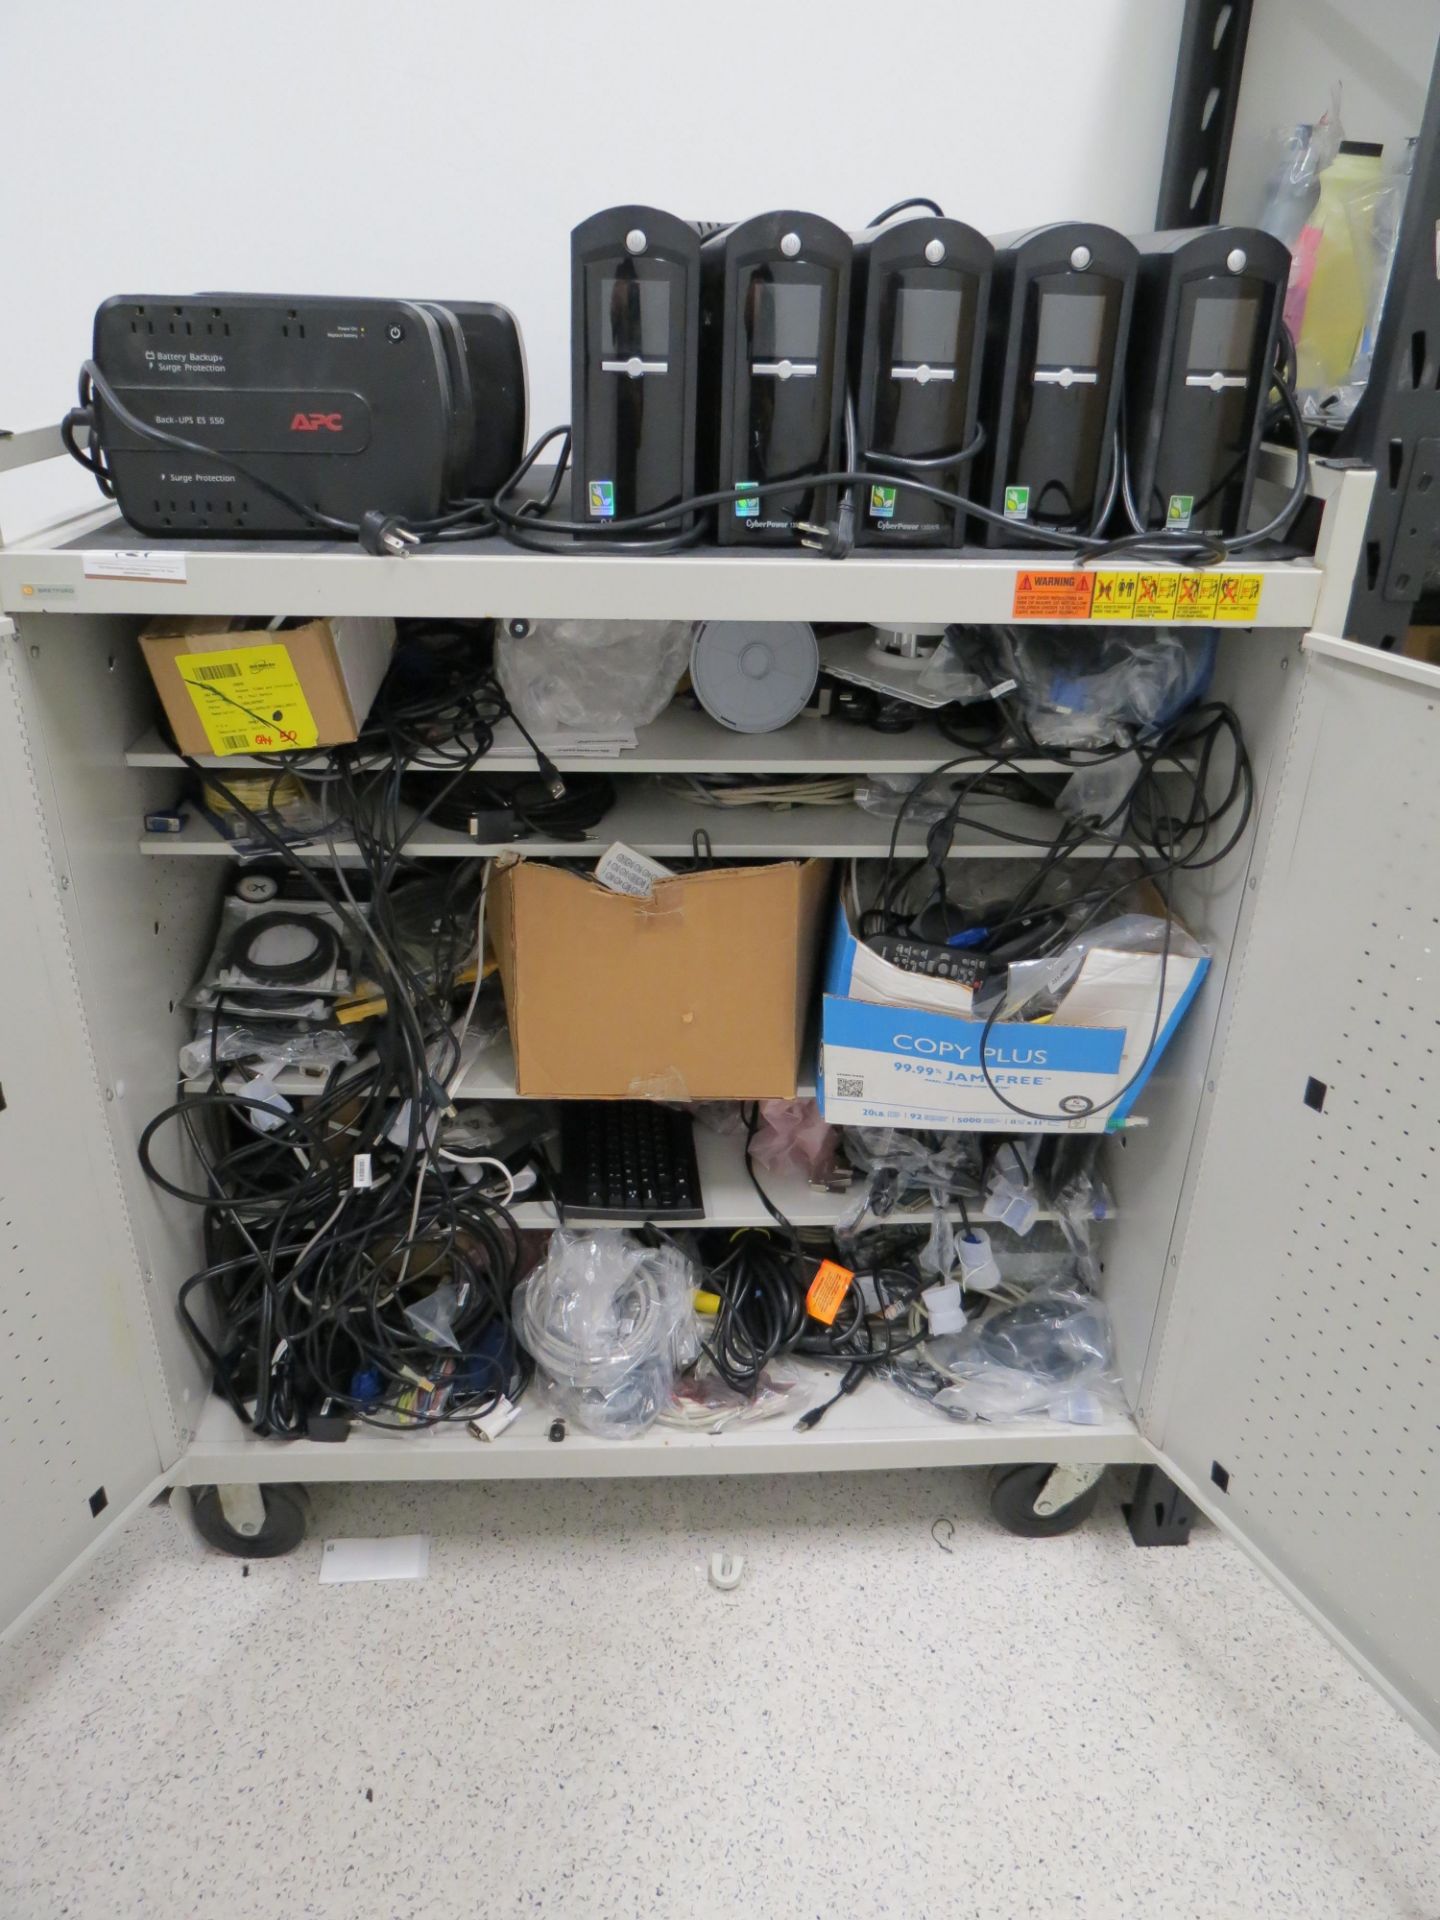 CONTENT ON TOP & INSIDE CART: UPS POWER SUPPLIES OF VARIOUS BRANDS, CABLES, MISC COMPUTER PARTS, & - Image 2 of 2